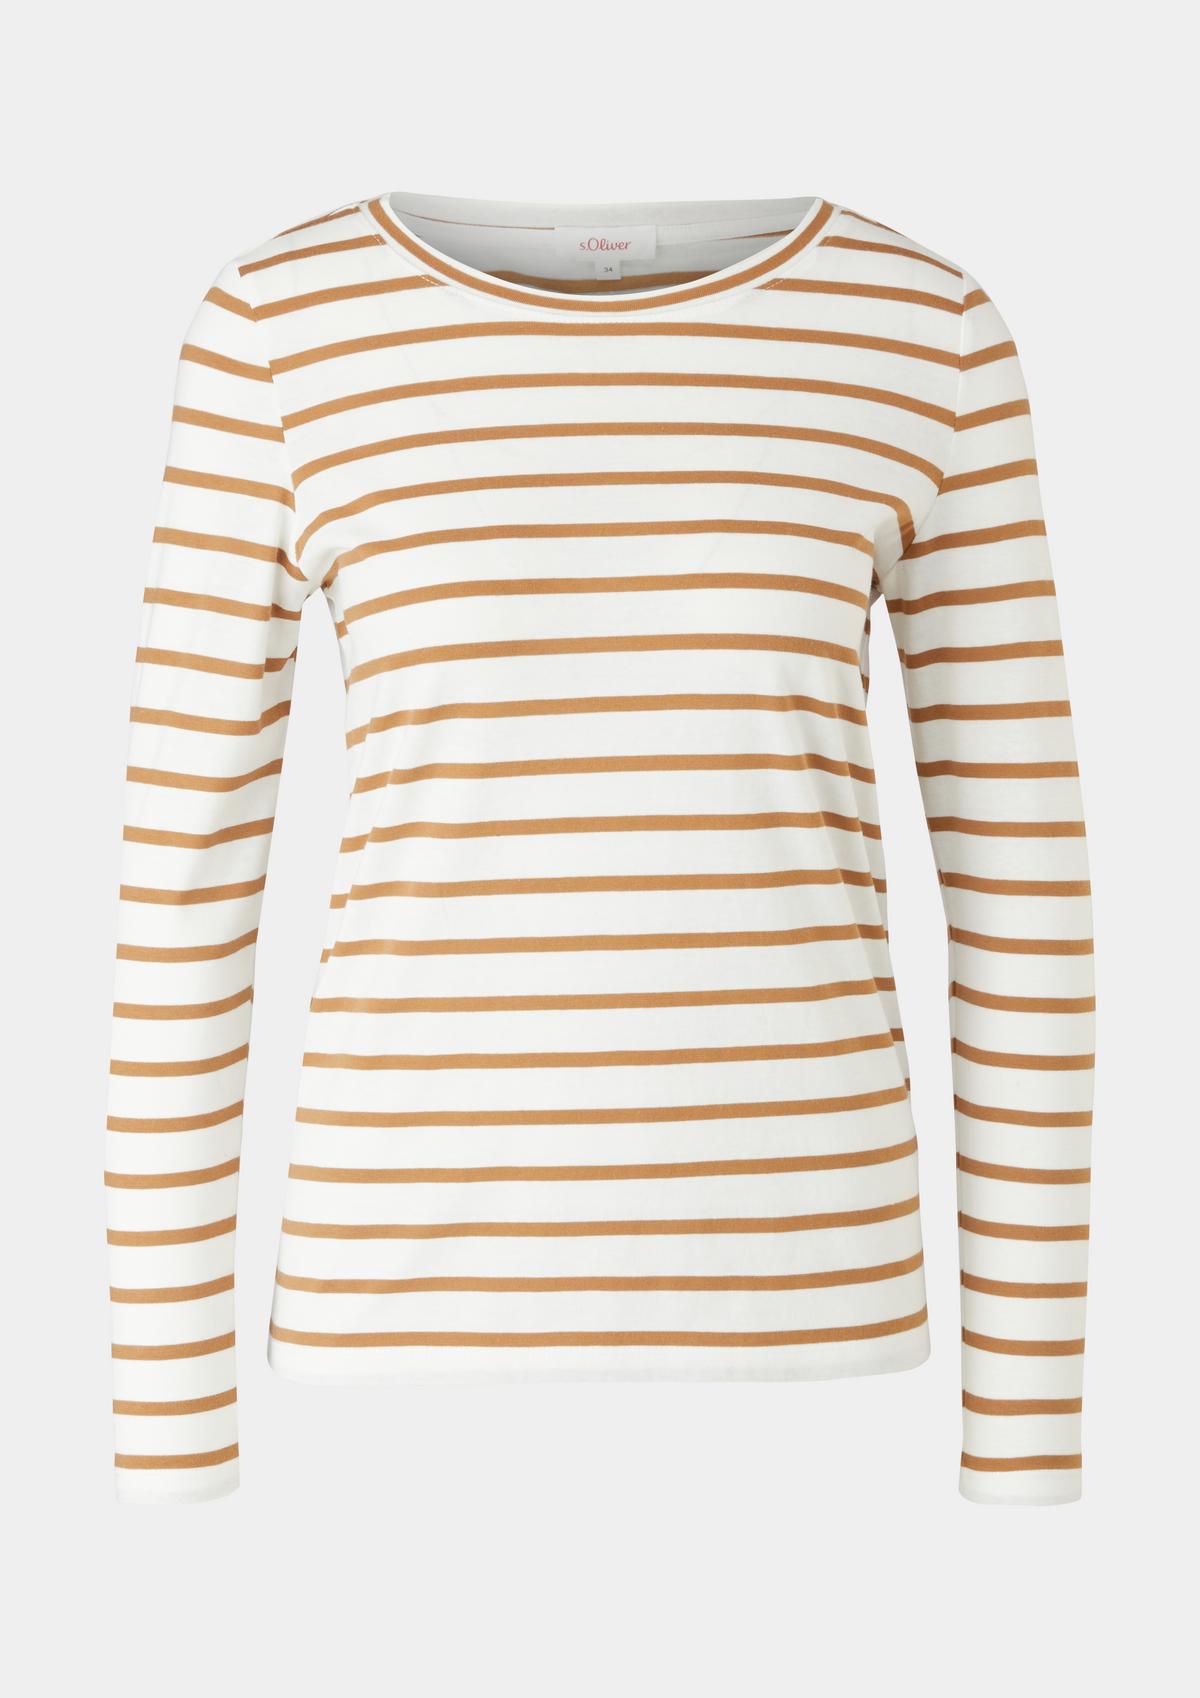 Striped long navy - sleeve top jersey